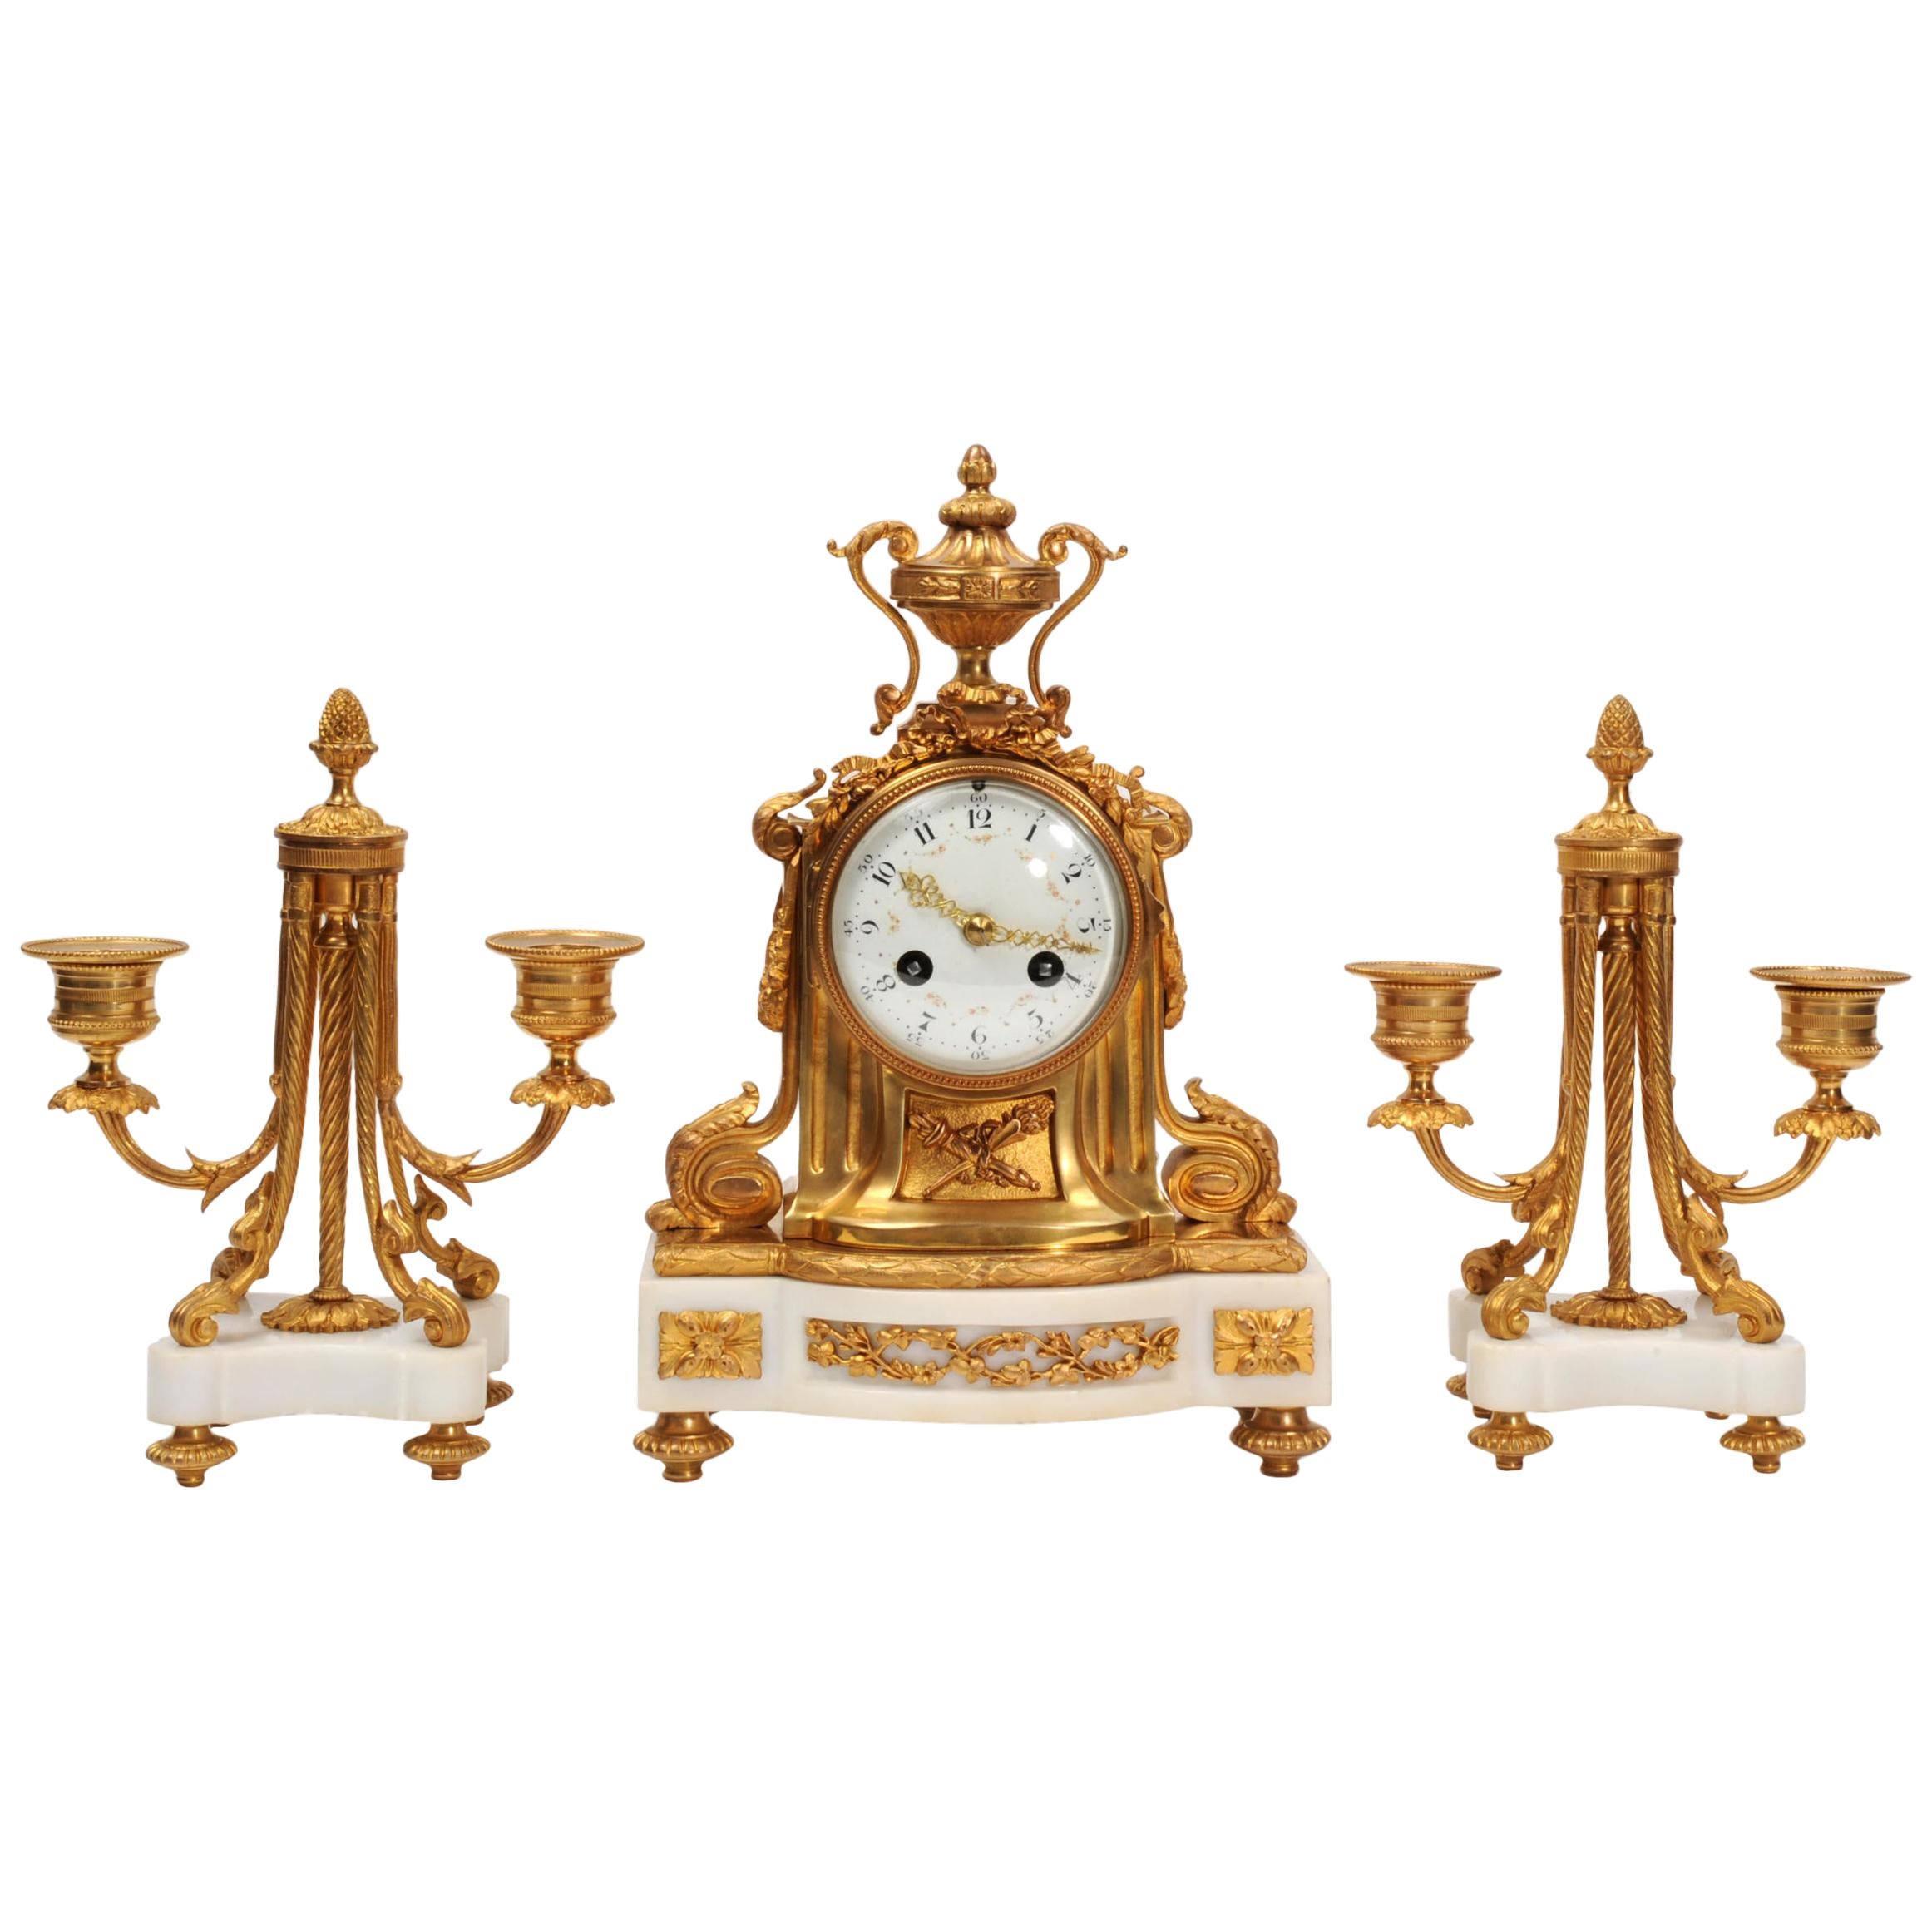 Antique French Ormolu and Marble Boudoir Clock Set by Vincenti